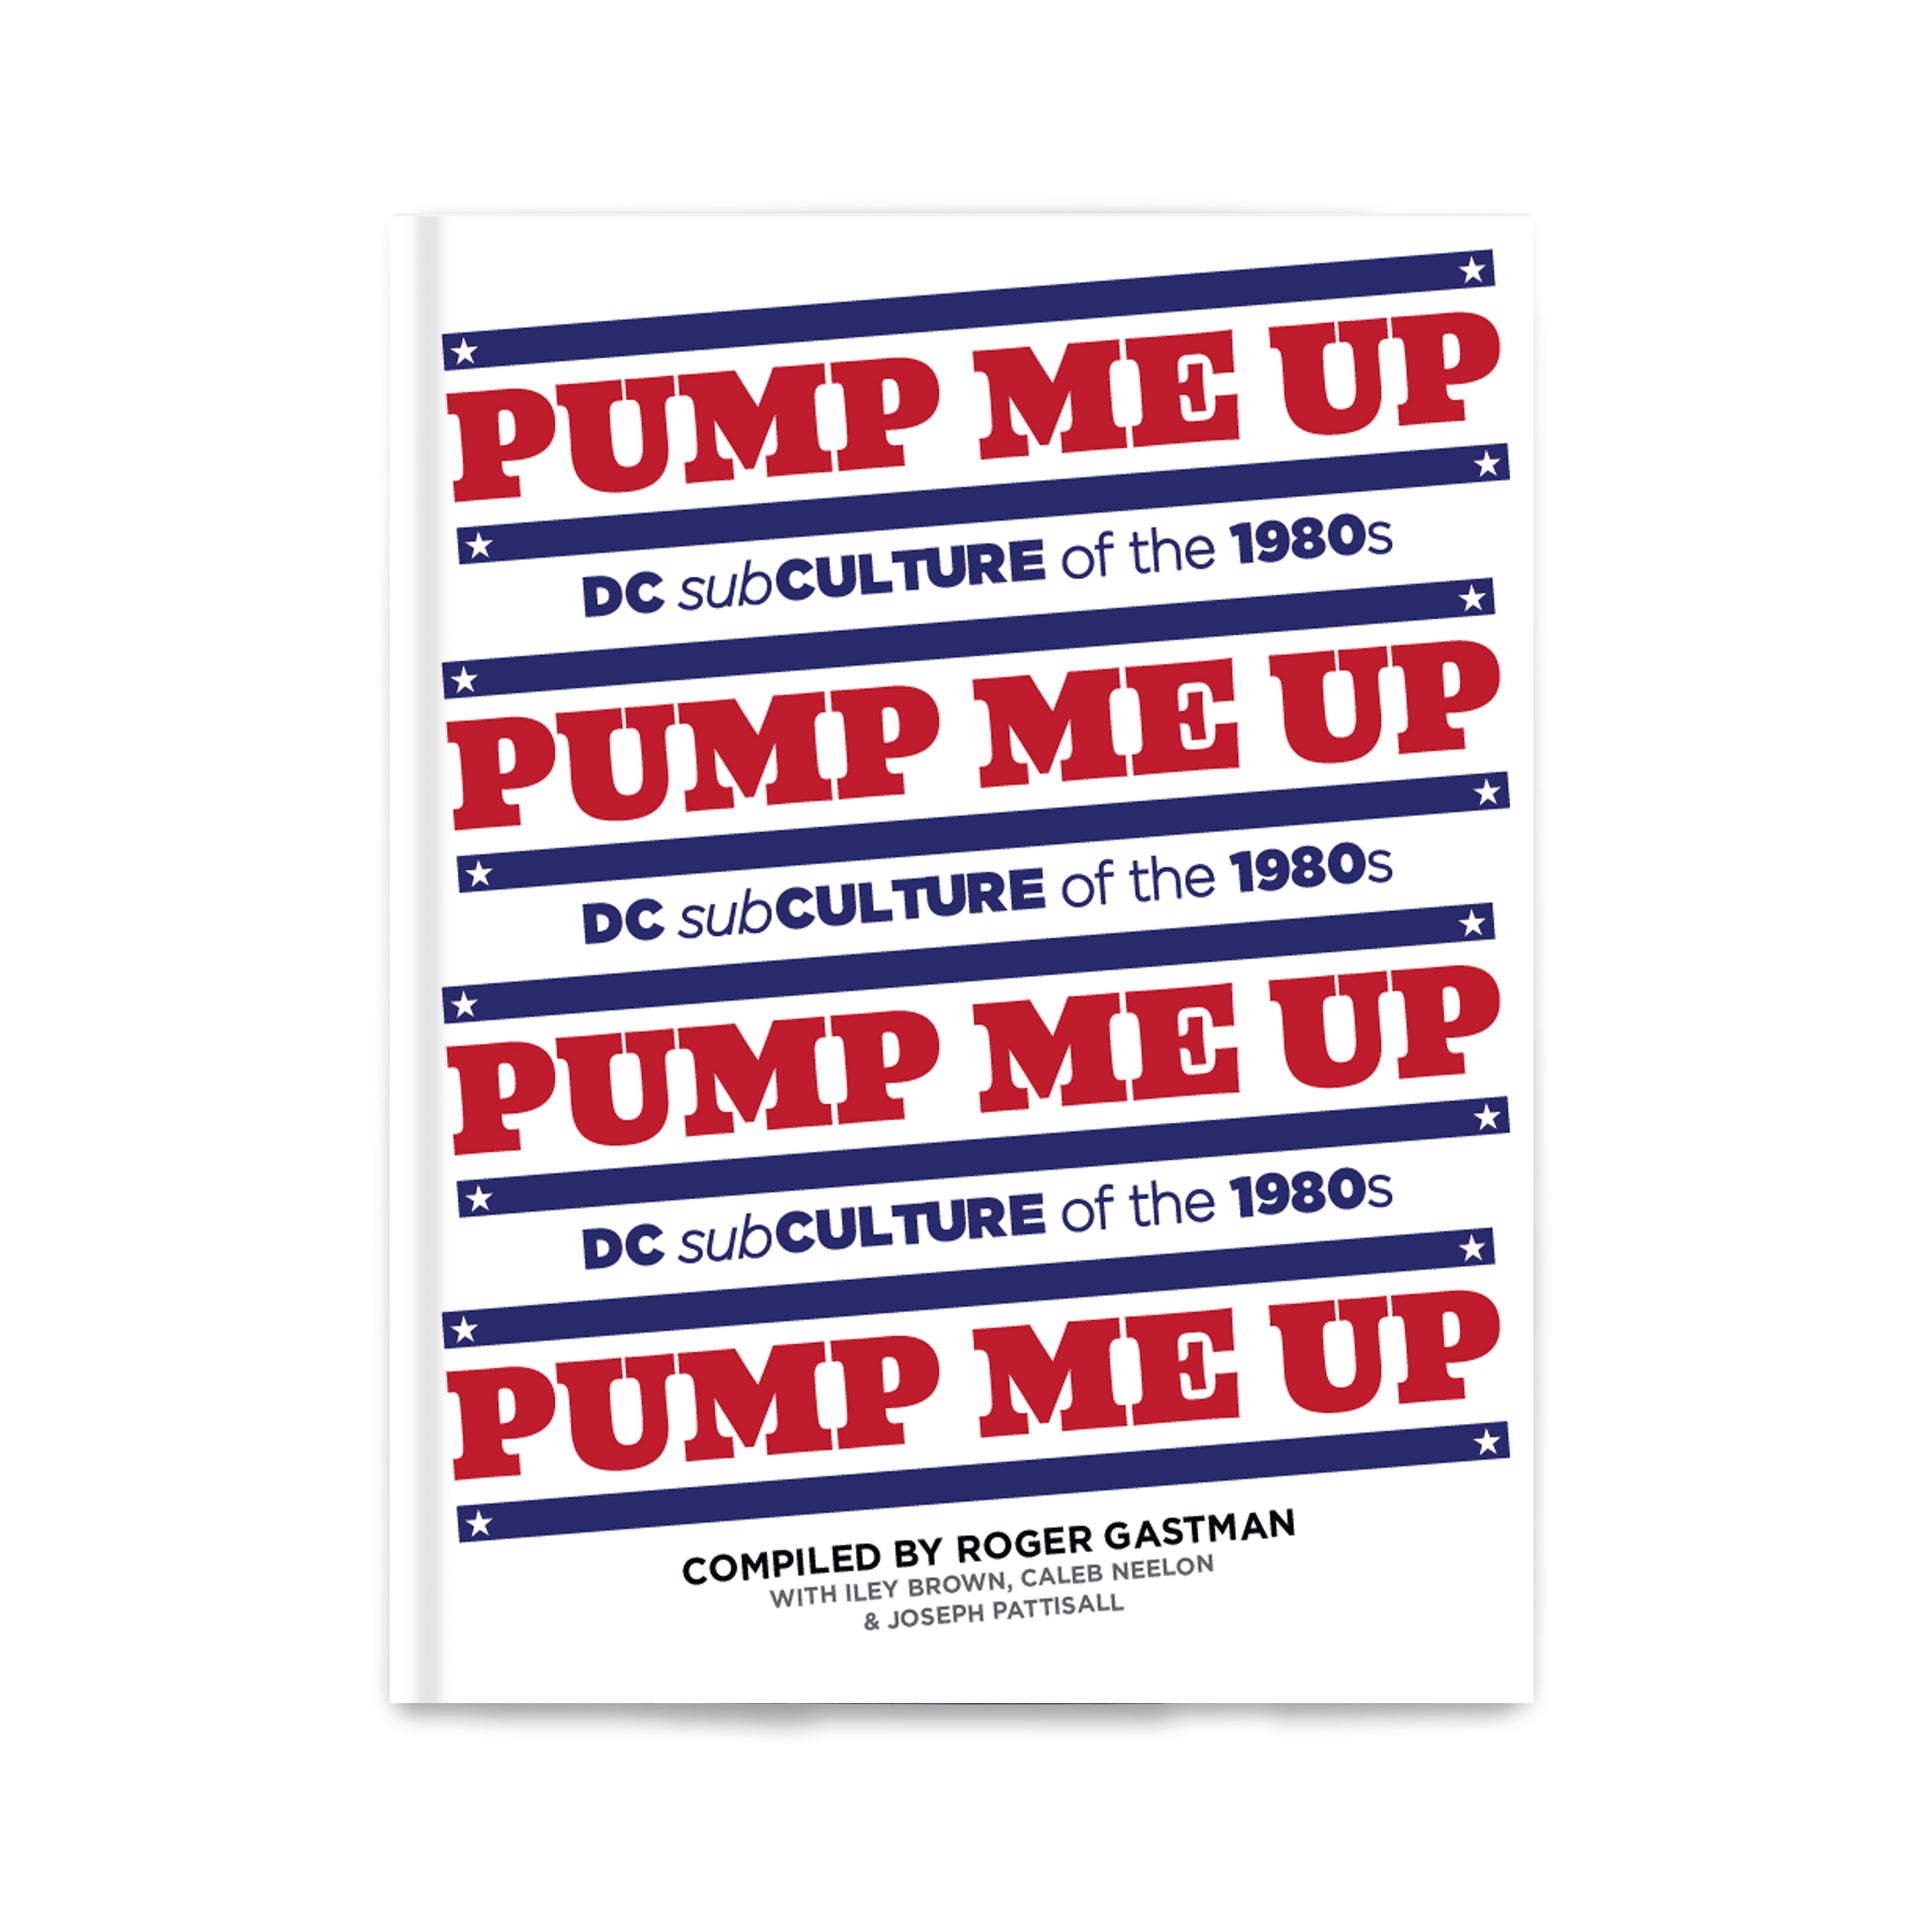 "PUMP ME UP: DC Subculture of the 1980s"